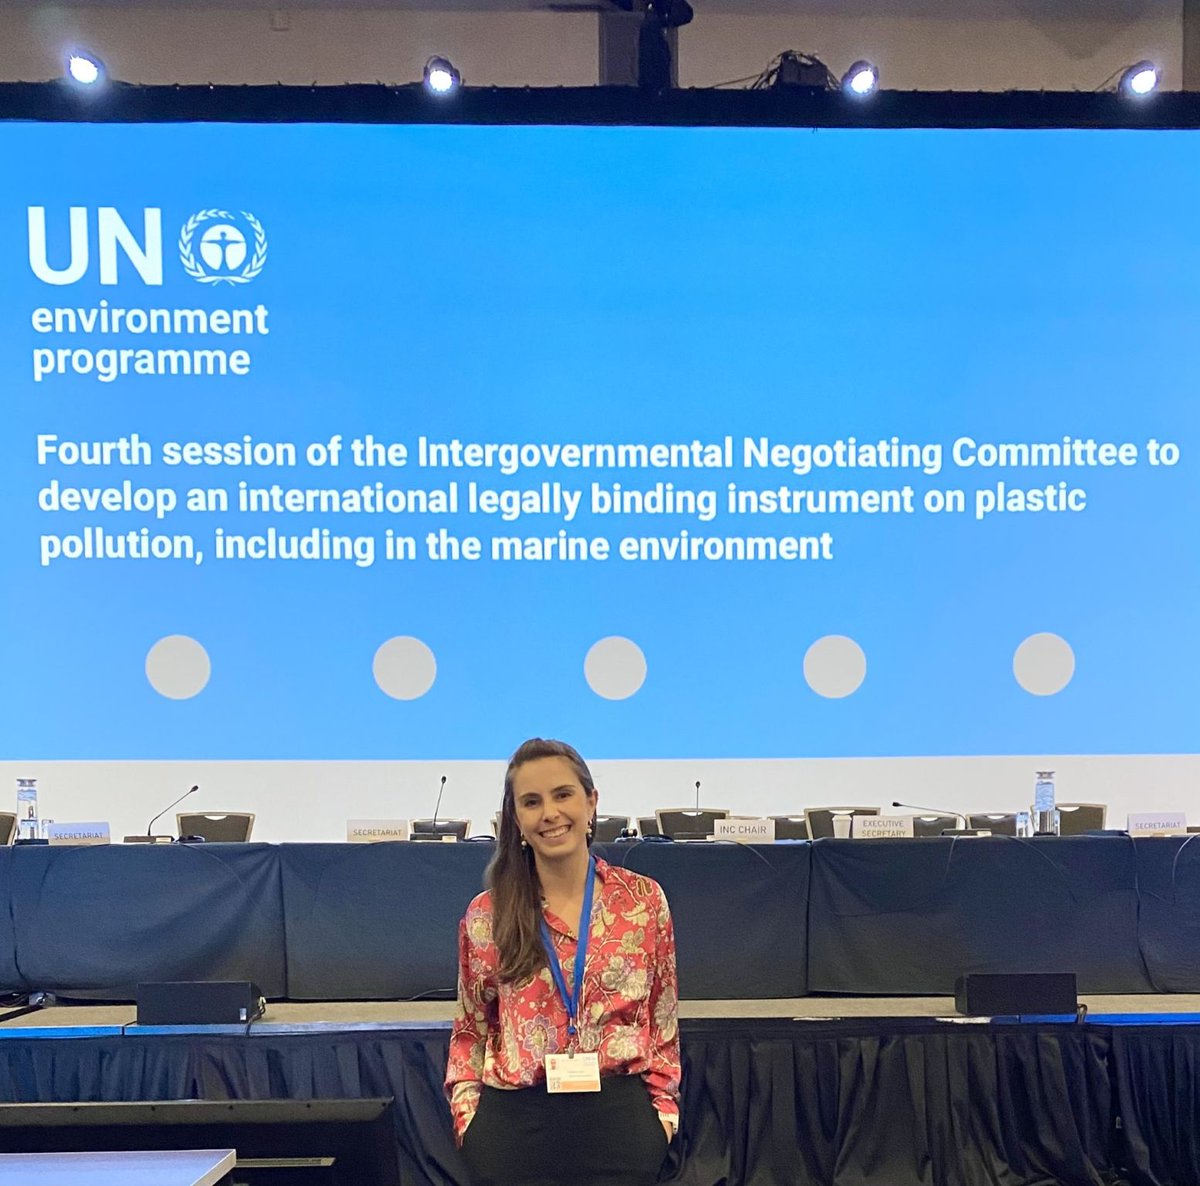 The BPF has arrived in Ottawa, Canada!  📍🇨🇦 

Looking forward to @UNEP's fourth session of the Intergovernmental Negotiating Committee (#INC4): rb.gy/6x91lh

#SustainableSolutions #GlobalInitiative